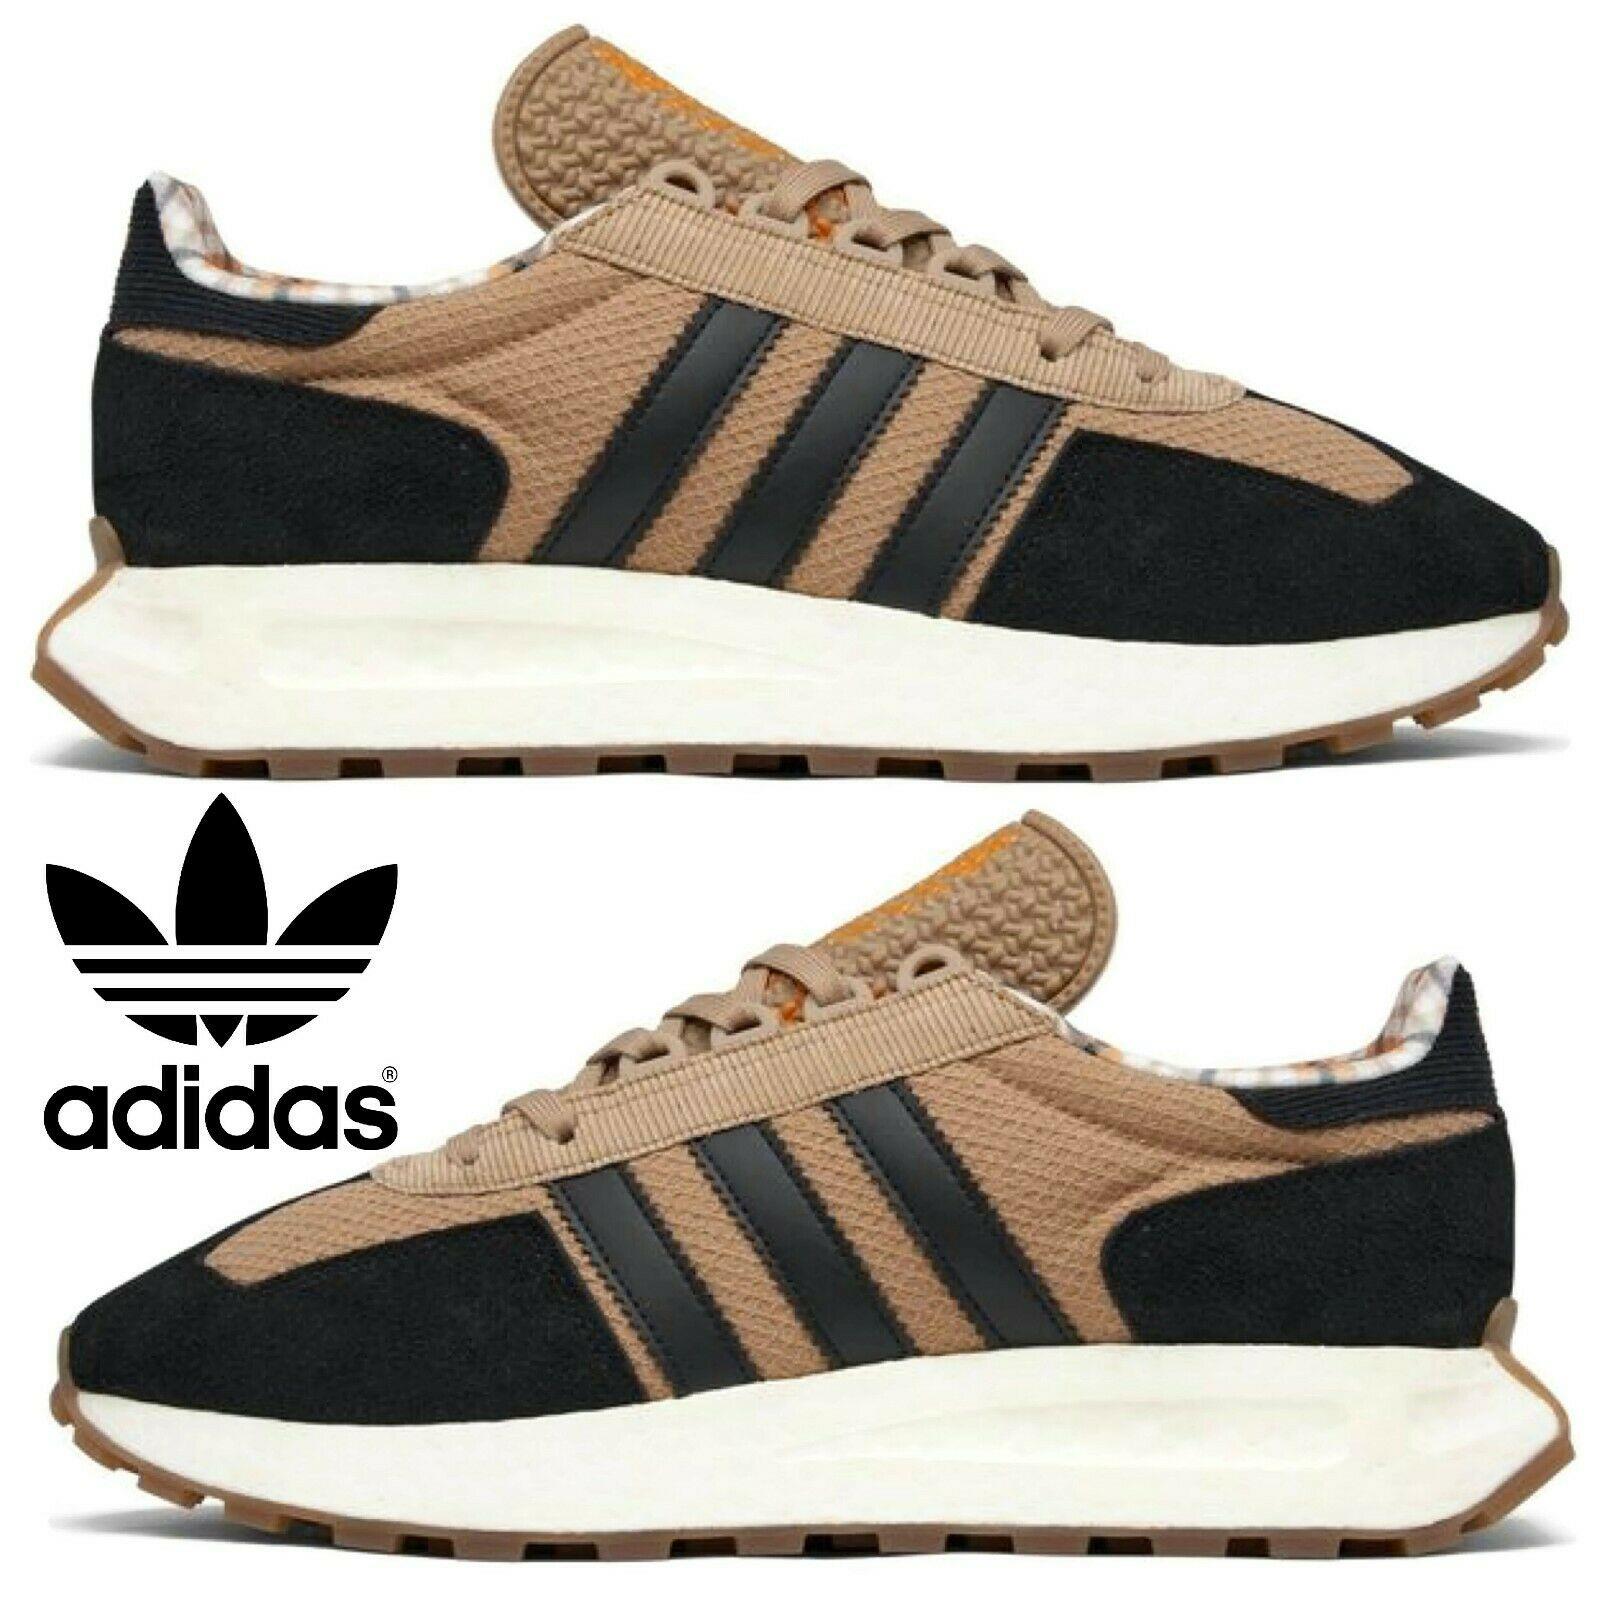 Adidas Retropy E5 Men`s Sneakers Running Shoes Gym Casual Sport Black Brown - Brown , Cardboard Manufacturer